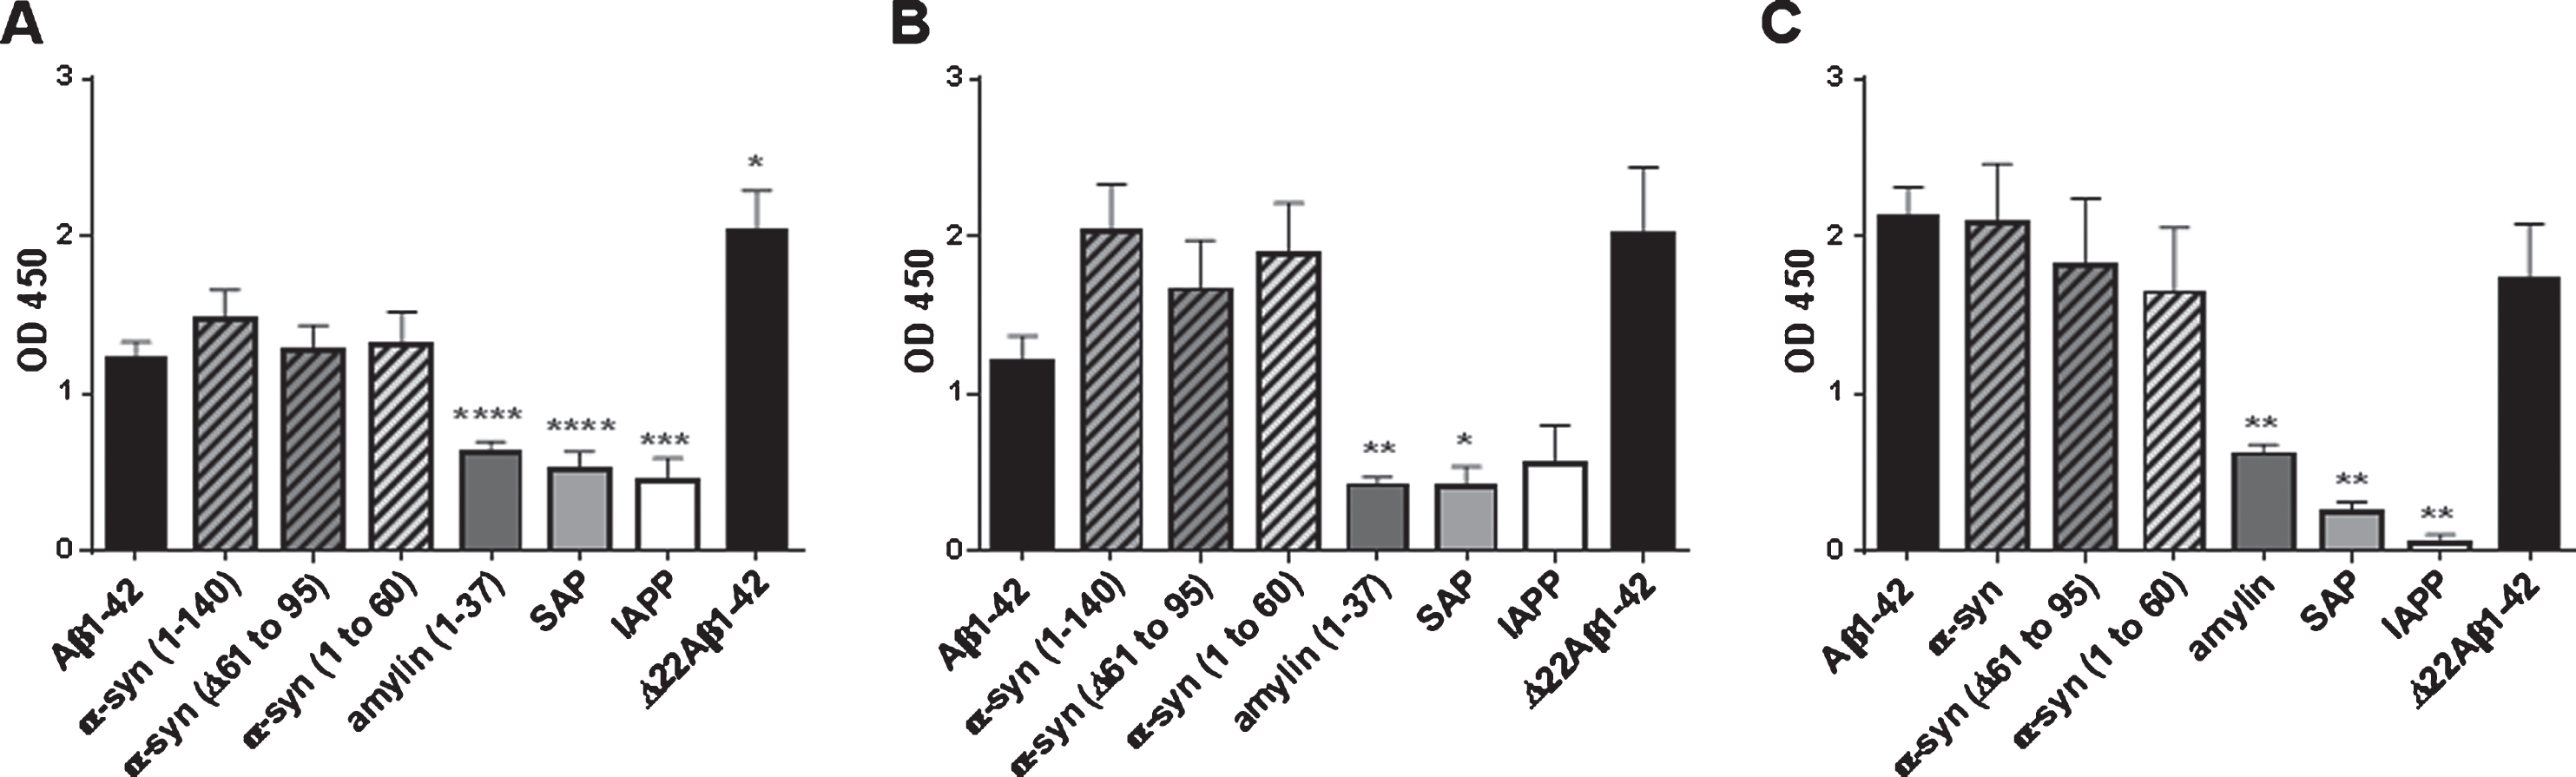 Cross-reactivity of antibodies in plasma of DNA Aβ42 immunized rabbits with α-synuclein. A) The plasma samples from fifteen rabbits from the 5th immunization time point were tested for binding to a variety of amyloid [amylin, islet amyloid protein (IAPP), serum amyloid P component (SAP)] and α-synuclein peptides (1–140, Δ61–95, and 1–60). Plasma was diluted 1:500 for these assays. No significant differences were found for the comparison of binding to Aβ1-42 and the α-synuclein peptides, whereas significantly less binding was found for amylin, IAPP, and SAP (Mann-Whitney p < 0.0001). B) The six rabbits which received continued immunizations were extracted from the 15 samples in A and shown again in B for a better comparison to C. Levels of significance dropped due to the smaller sample size, but were still highly significant in the comparison of binding to Aβ1-42 with binding to amylin or SAP (Mann-Whitney p = 0.0043 and 0.0173). C) Cross-reactivity of plasma antibodies in six rabbits, which had received a total of ten DNA Aβ42 immunizations, to α-synuclein was confirmed, as well as no binding to amylin, SAP, and IAPP. *, **, ***, and **** indicate p-values of < 0.05, < 0.005, < 0.0005, and < 0.0001, respectively.